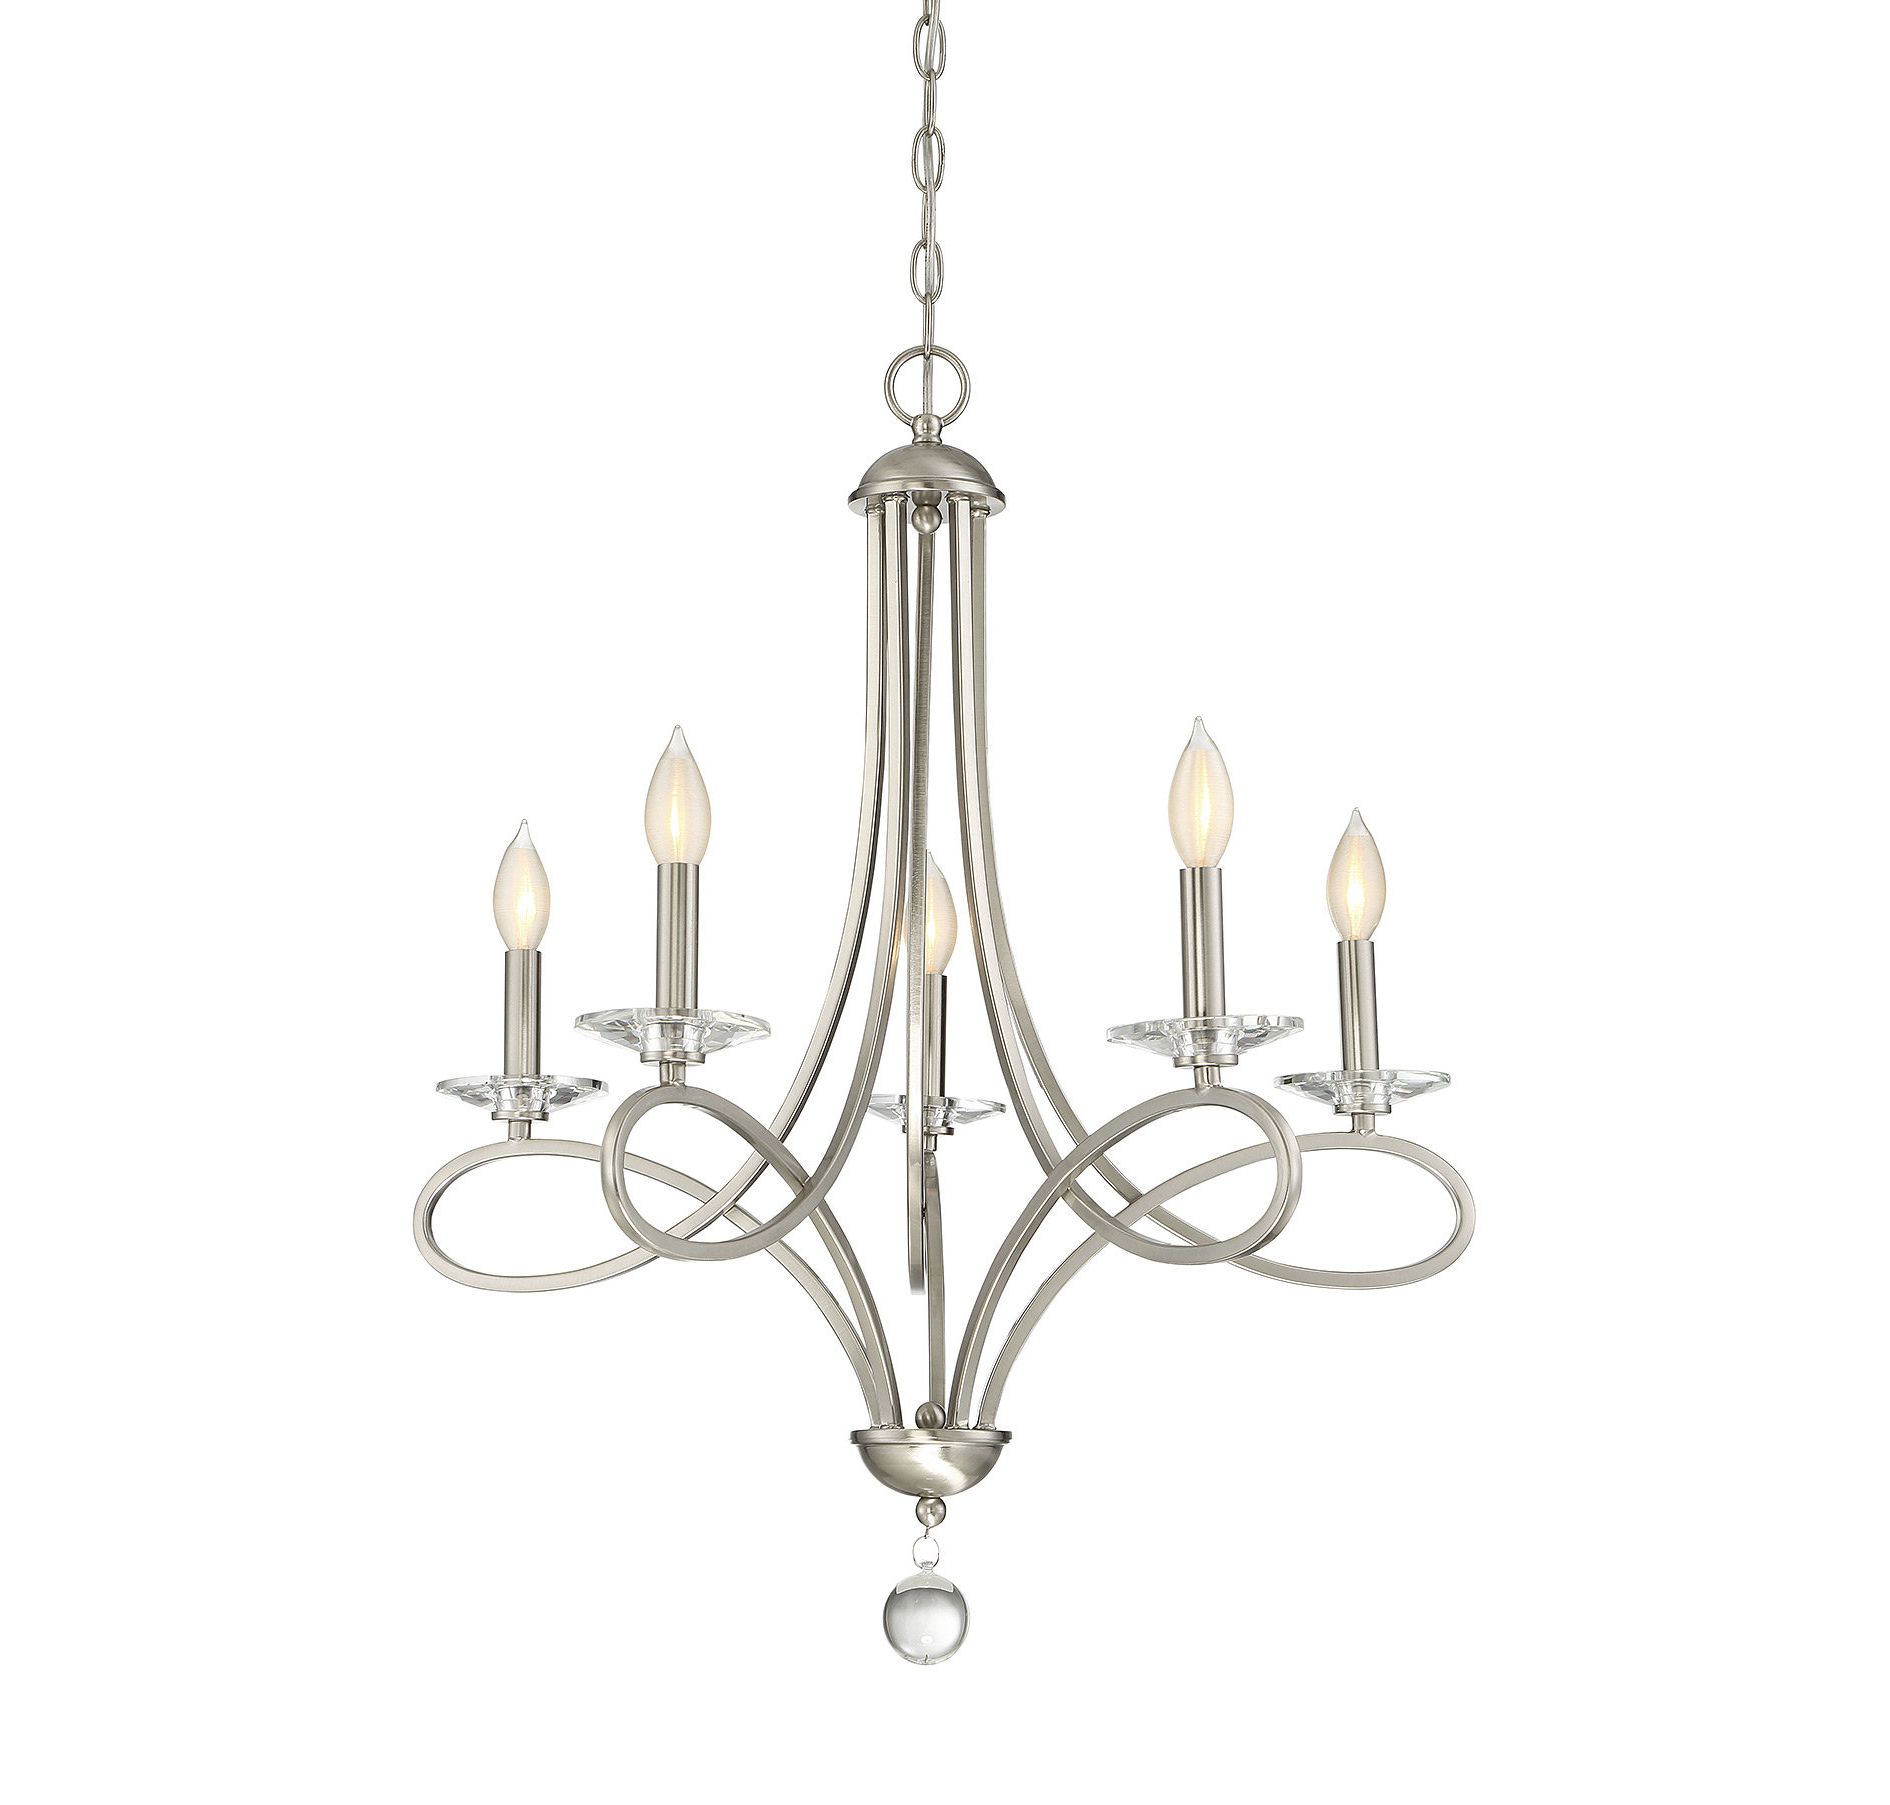 Berger 5 Light Candle Style Chandelier In Latest Berger 5 Light Candle Style Chandeliers (View 1 of 20)